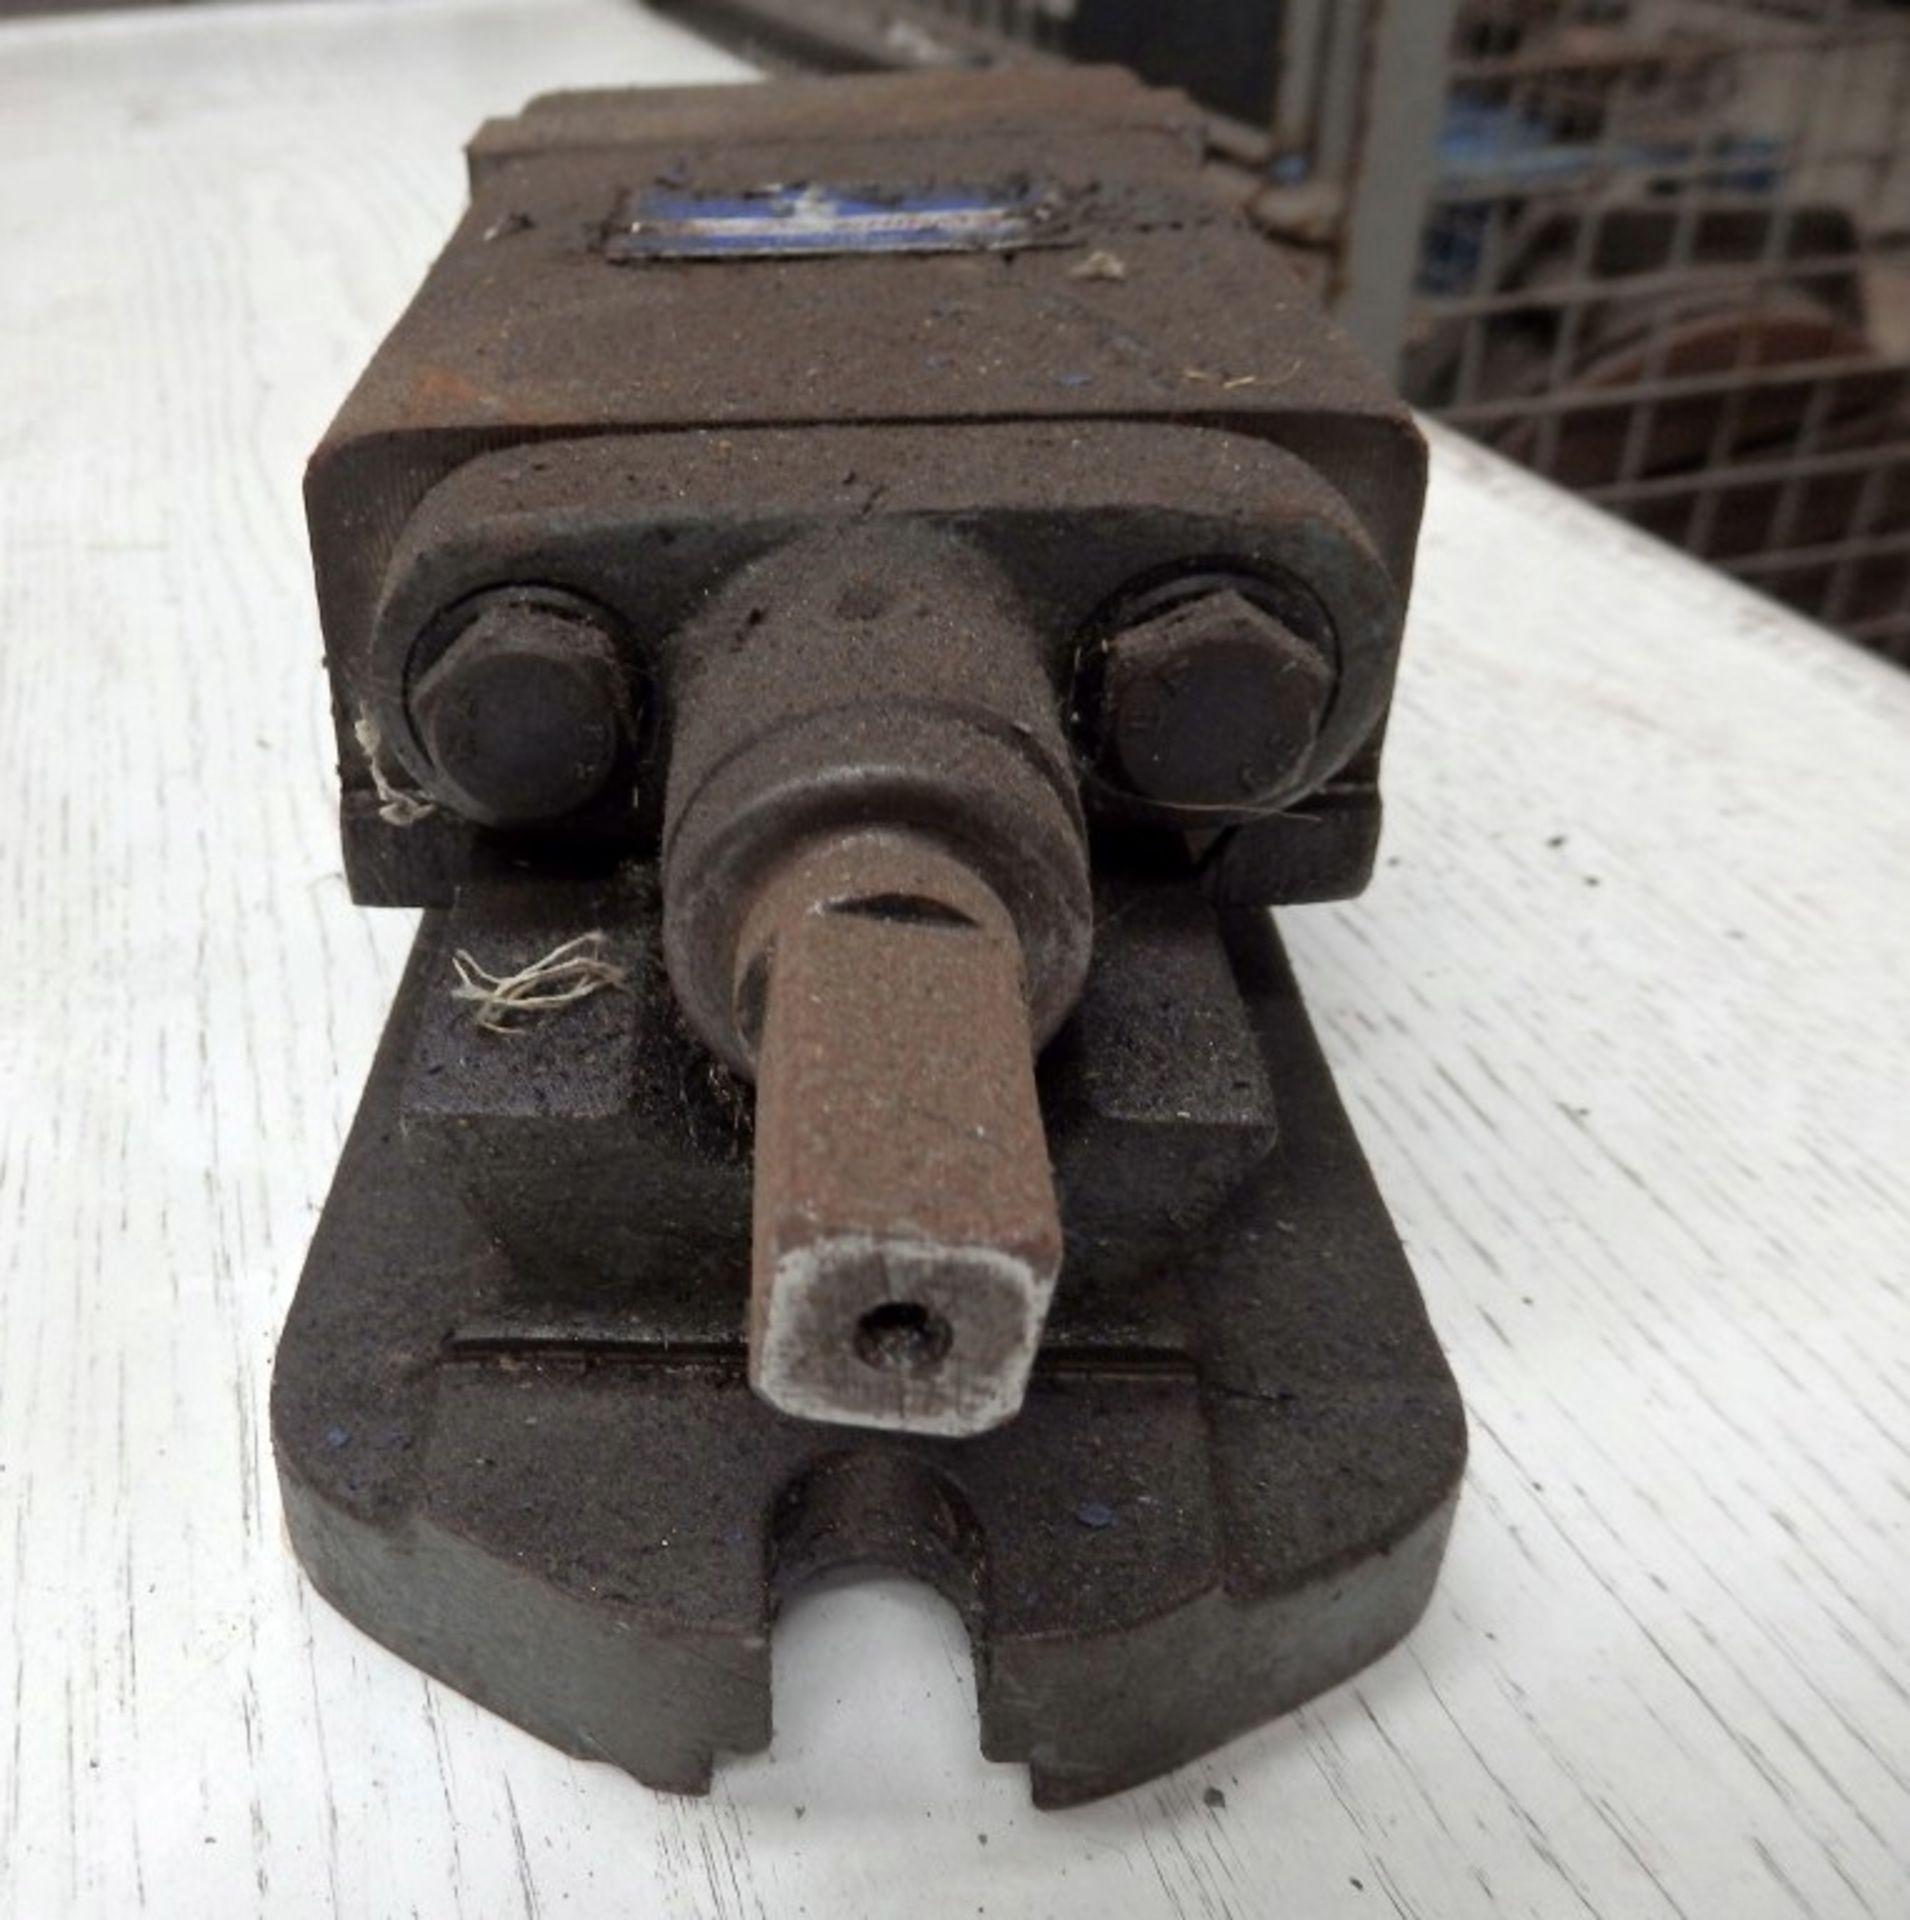 1 x Machine Vice - Perfect For Precise Workholding - Used - Ref WPM069/578 - CL057 - Location: